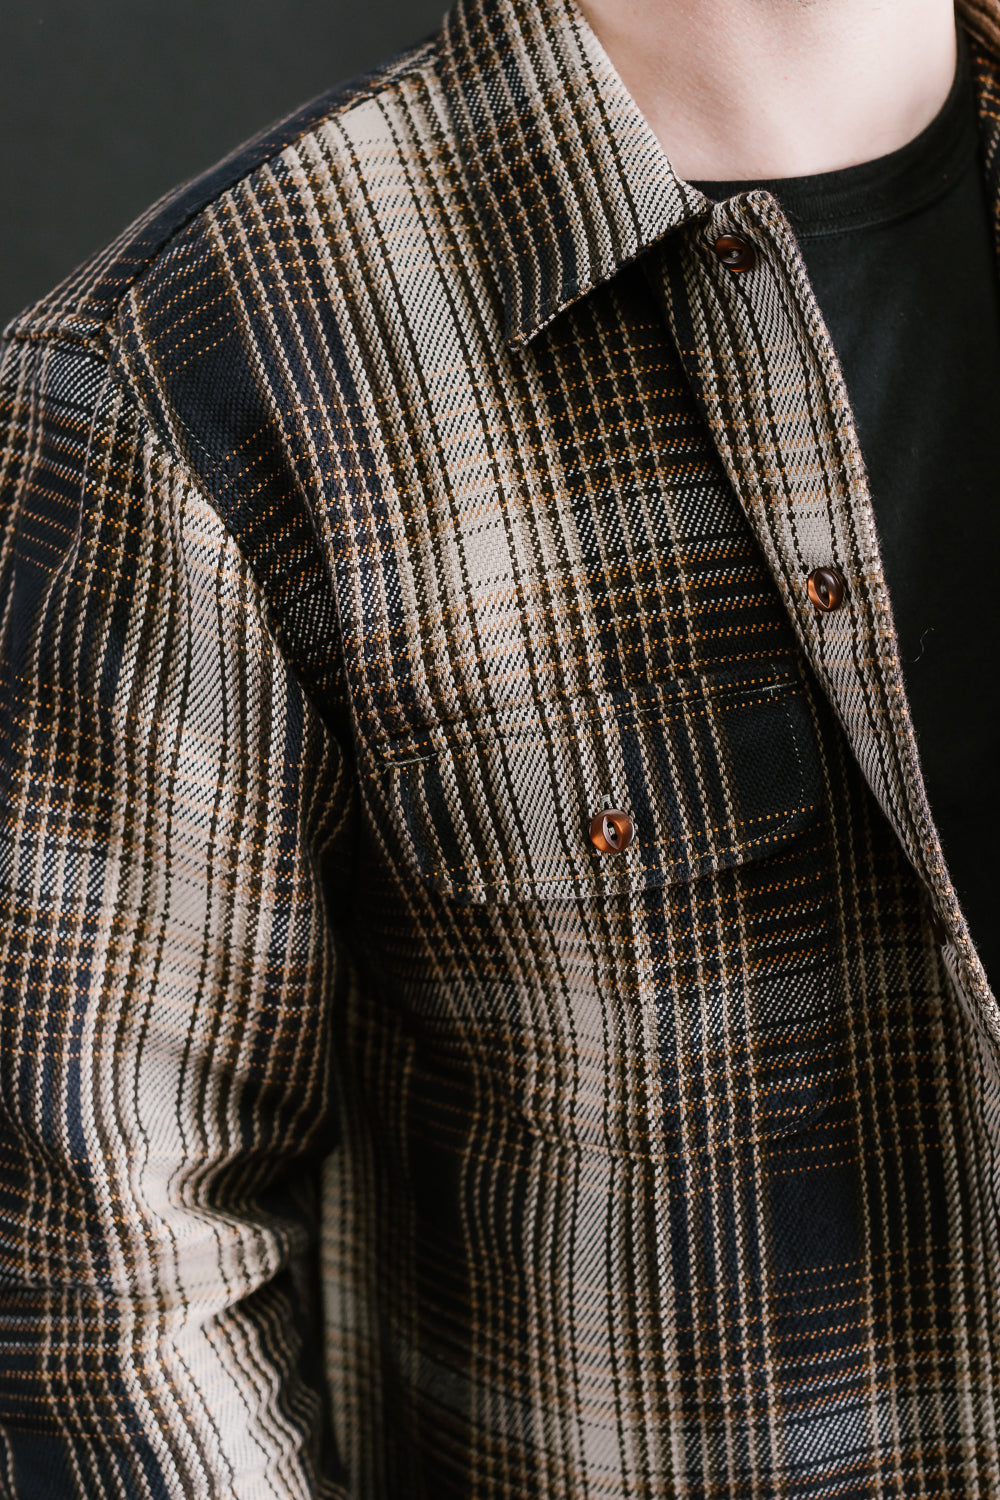 Webster Shirt Twill Check - Navy, White, Yellow, Brown